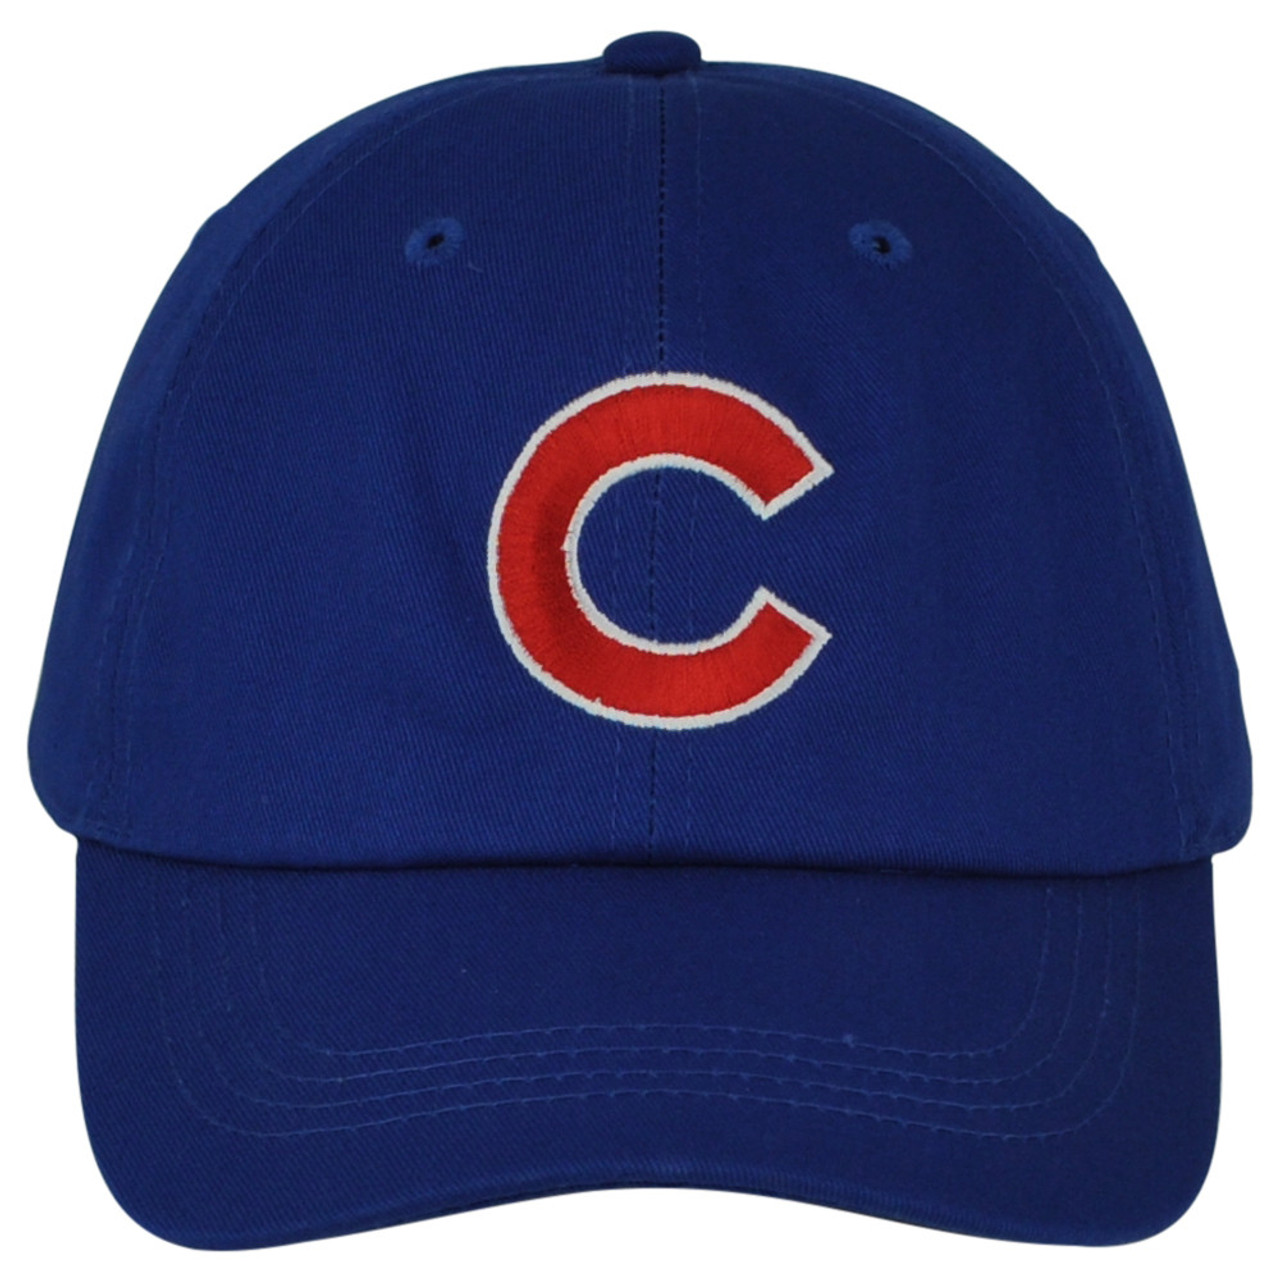 MLB Fan Favorite Chicago Cubs Men Blue Relaxed Curved Bill Adjustable Hat  Cap - Sinbad Sports Store